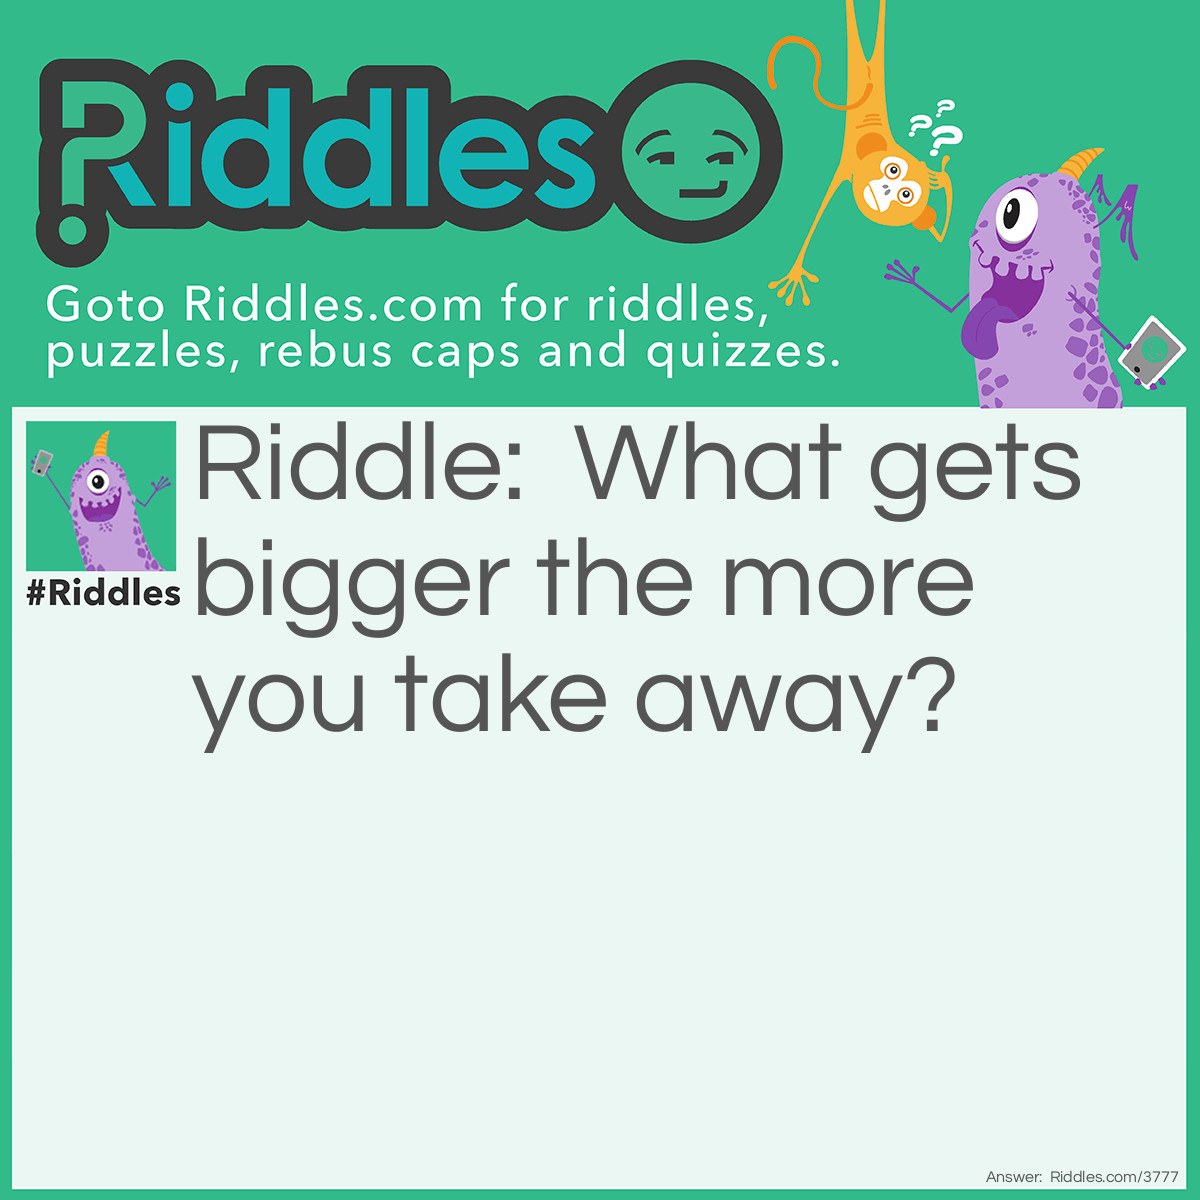 Riddle: What gets bigger the more you take away? Answer: A hole.